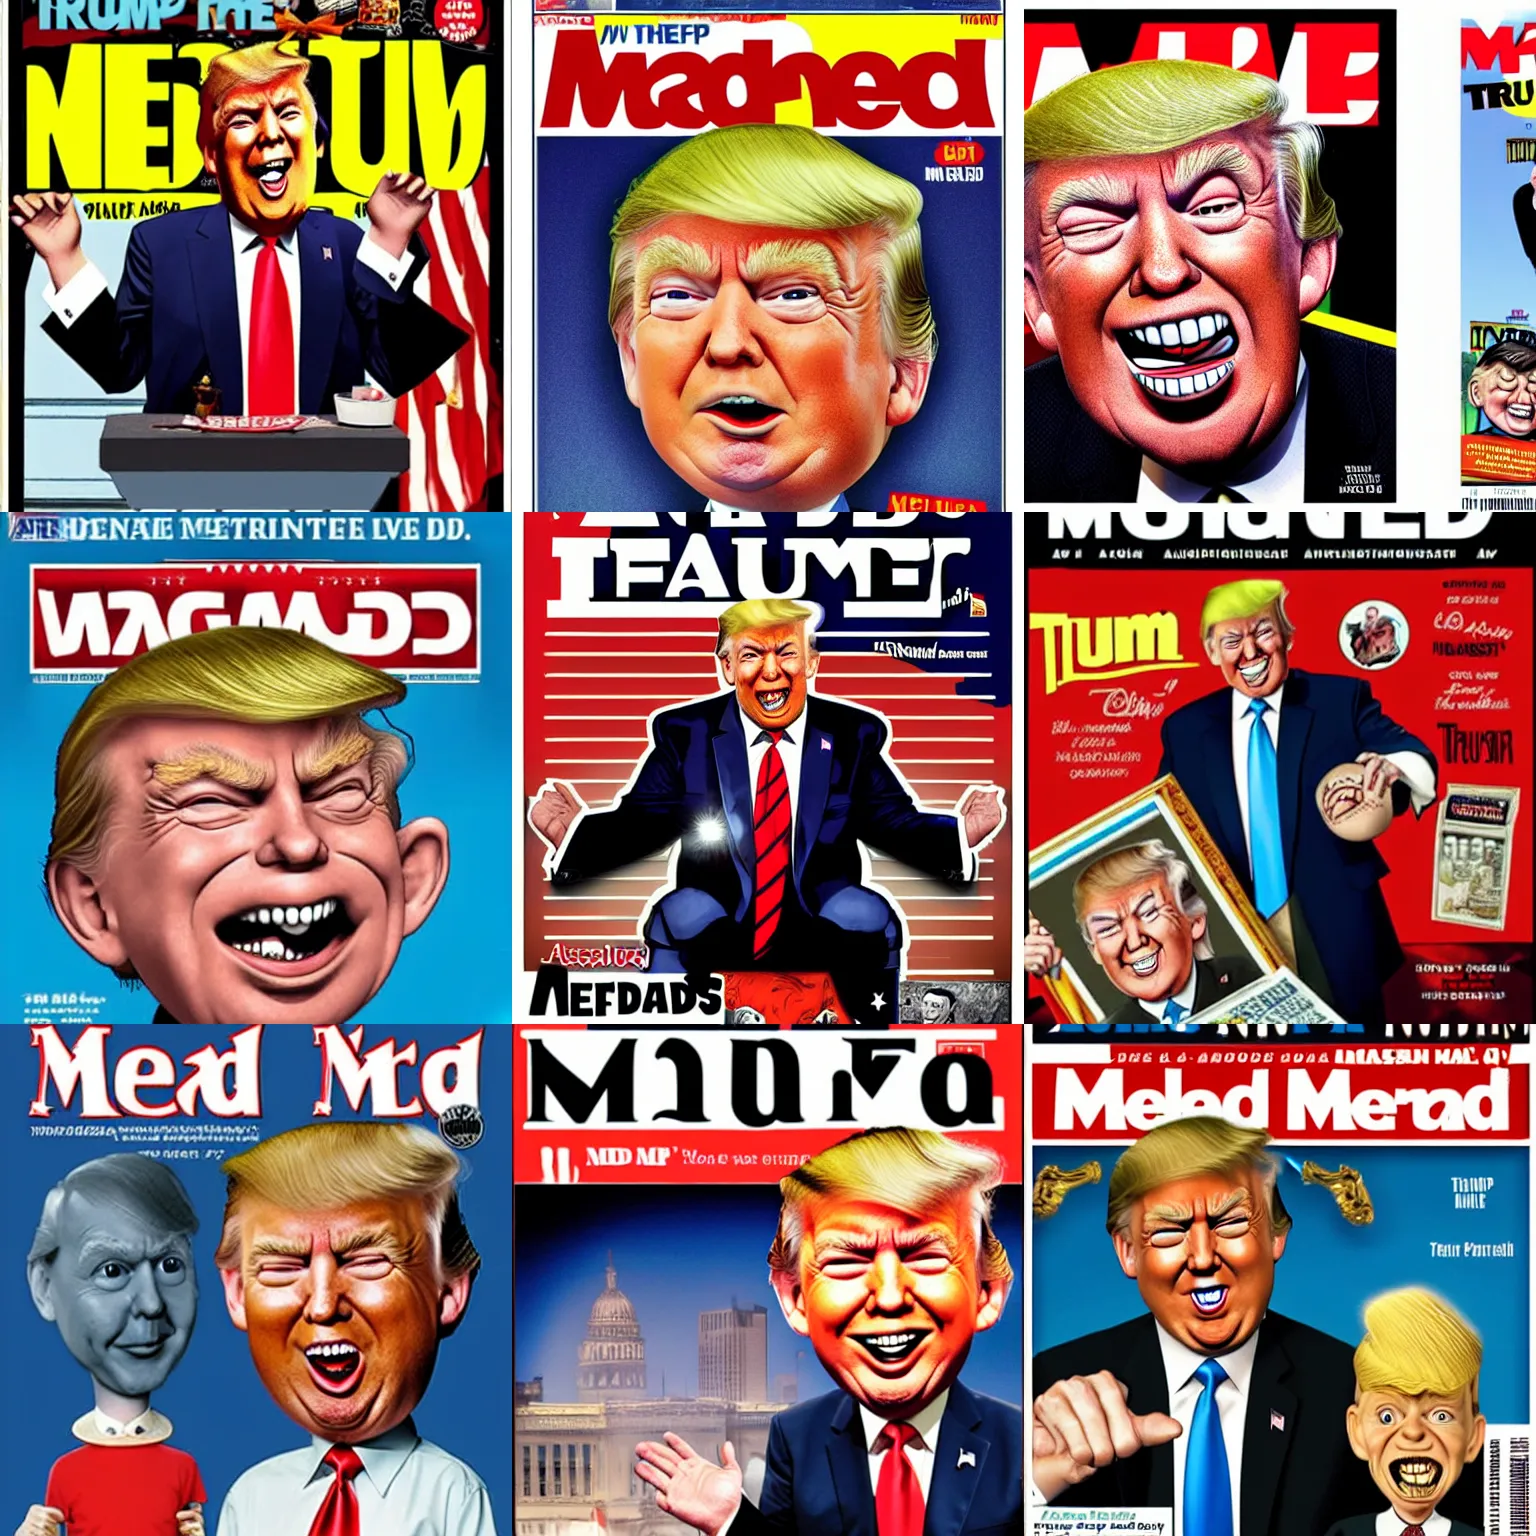 Prompt: Trump as Alfred E Neuman on the cover of the MAD magazine